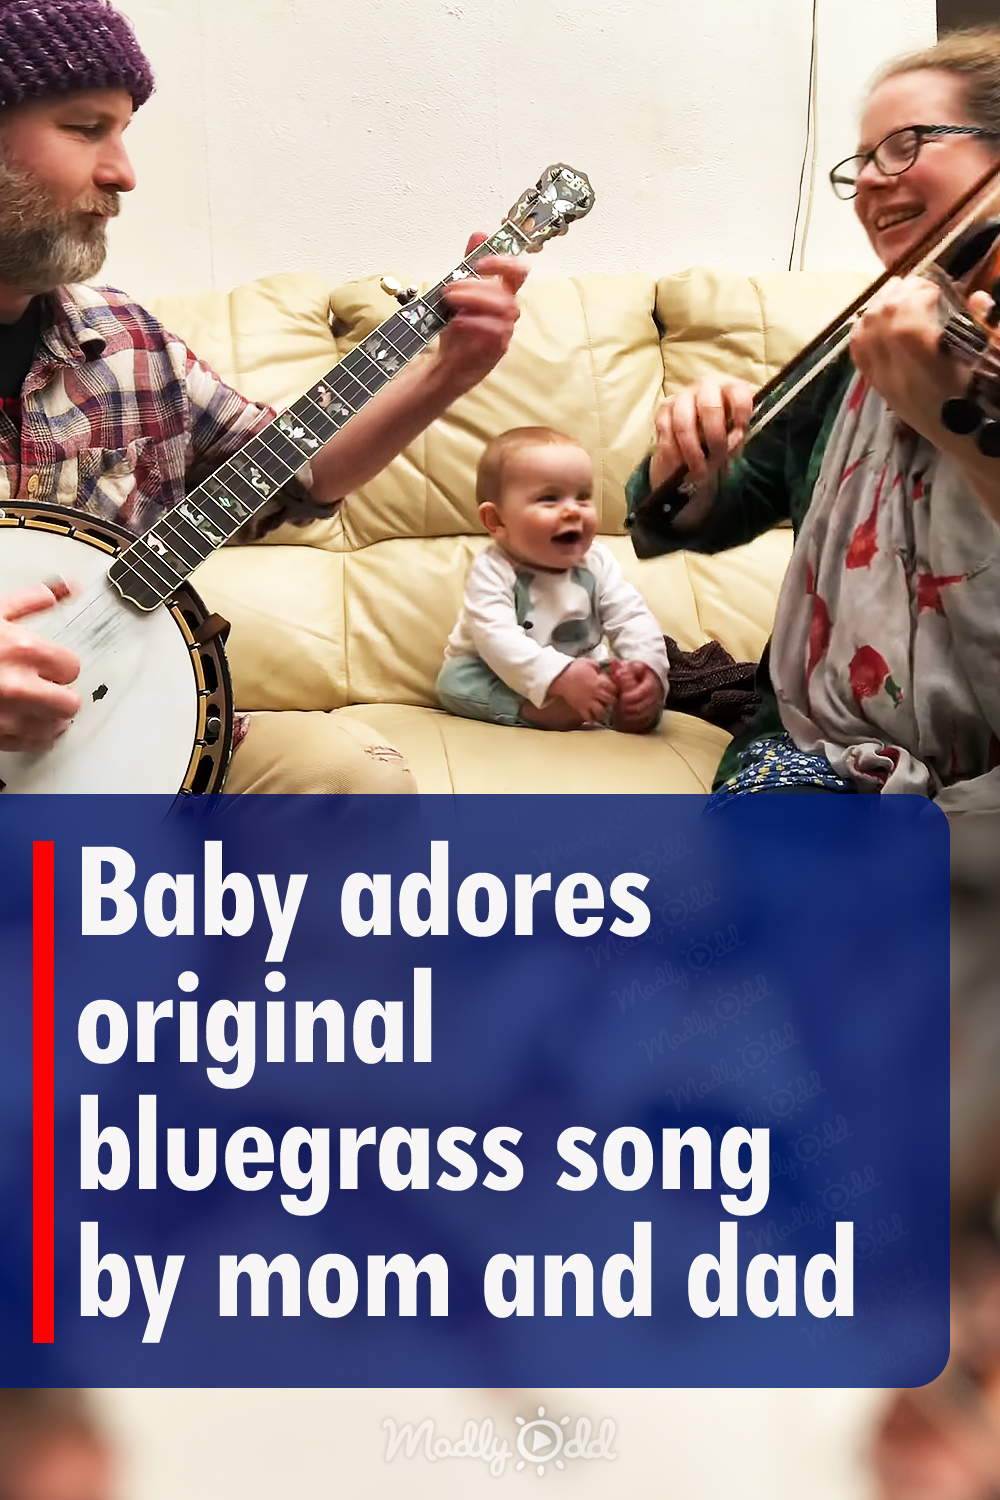 Baby adores original bluegrass song by mom and dad